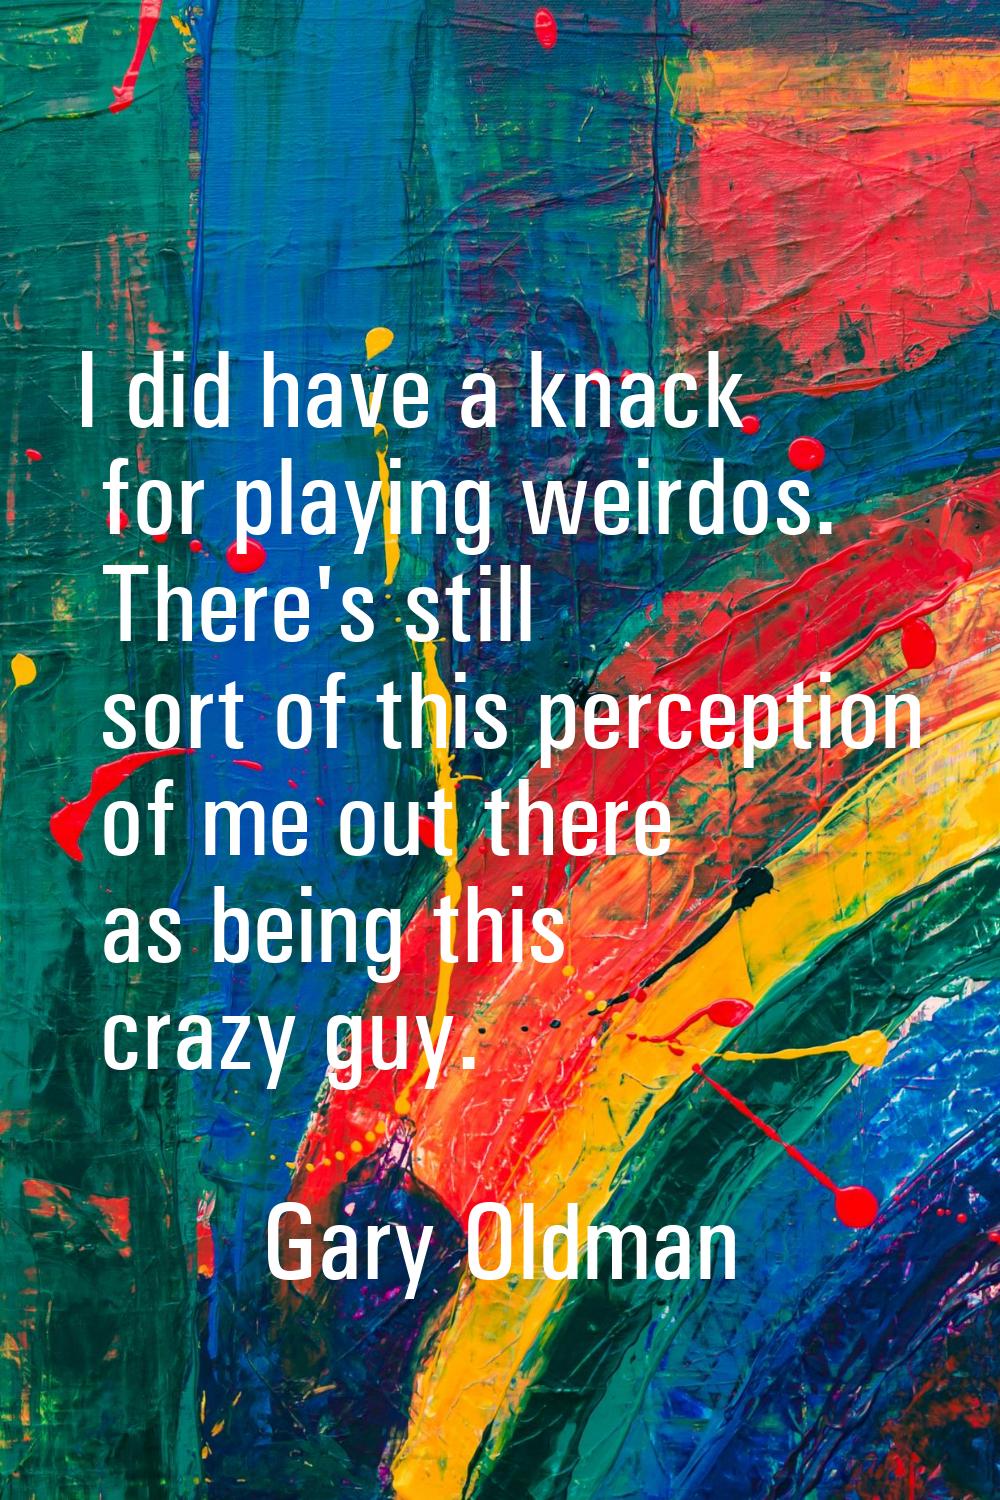 I did have a knack for playing weirdos. There's still sort of this perception of me out there as be